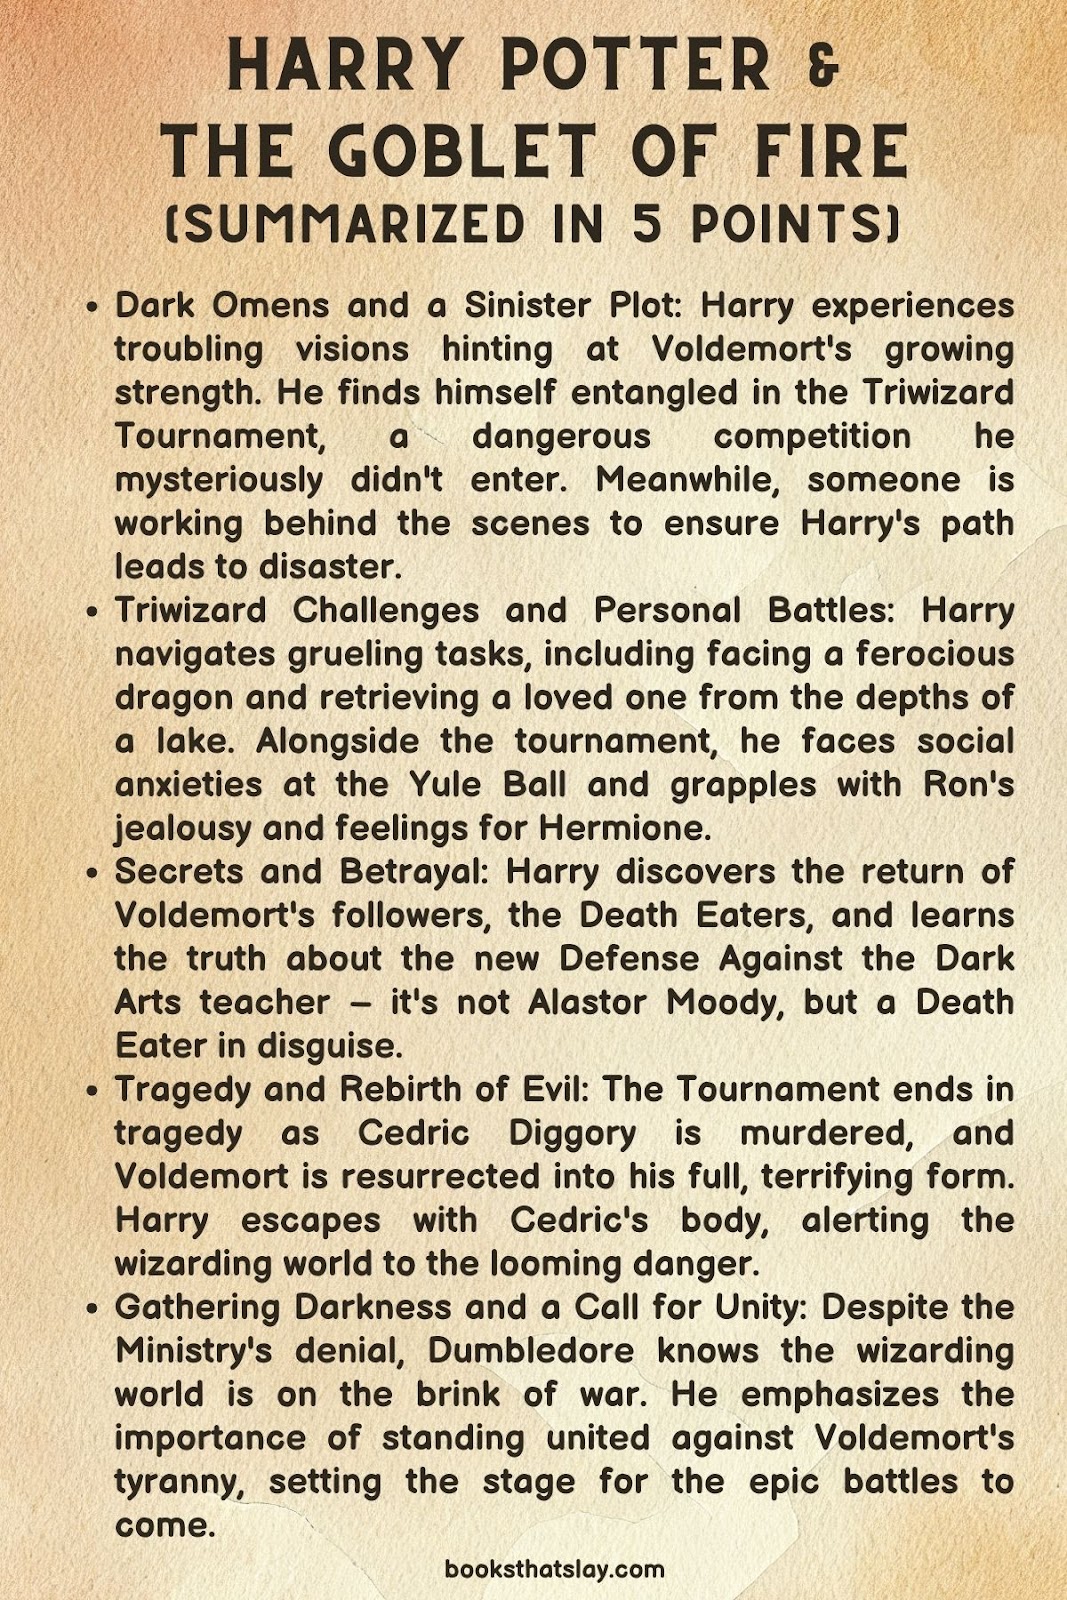 Harry Potter and The Goblet of Fire Summary, Characters and Themes